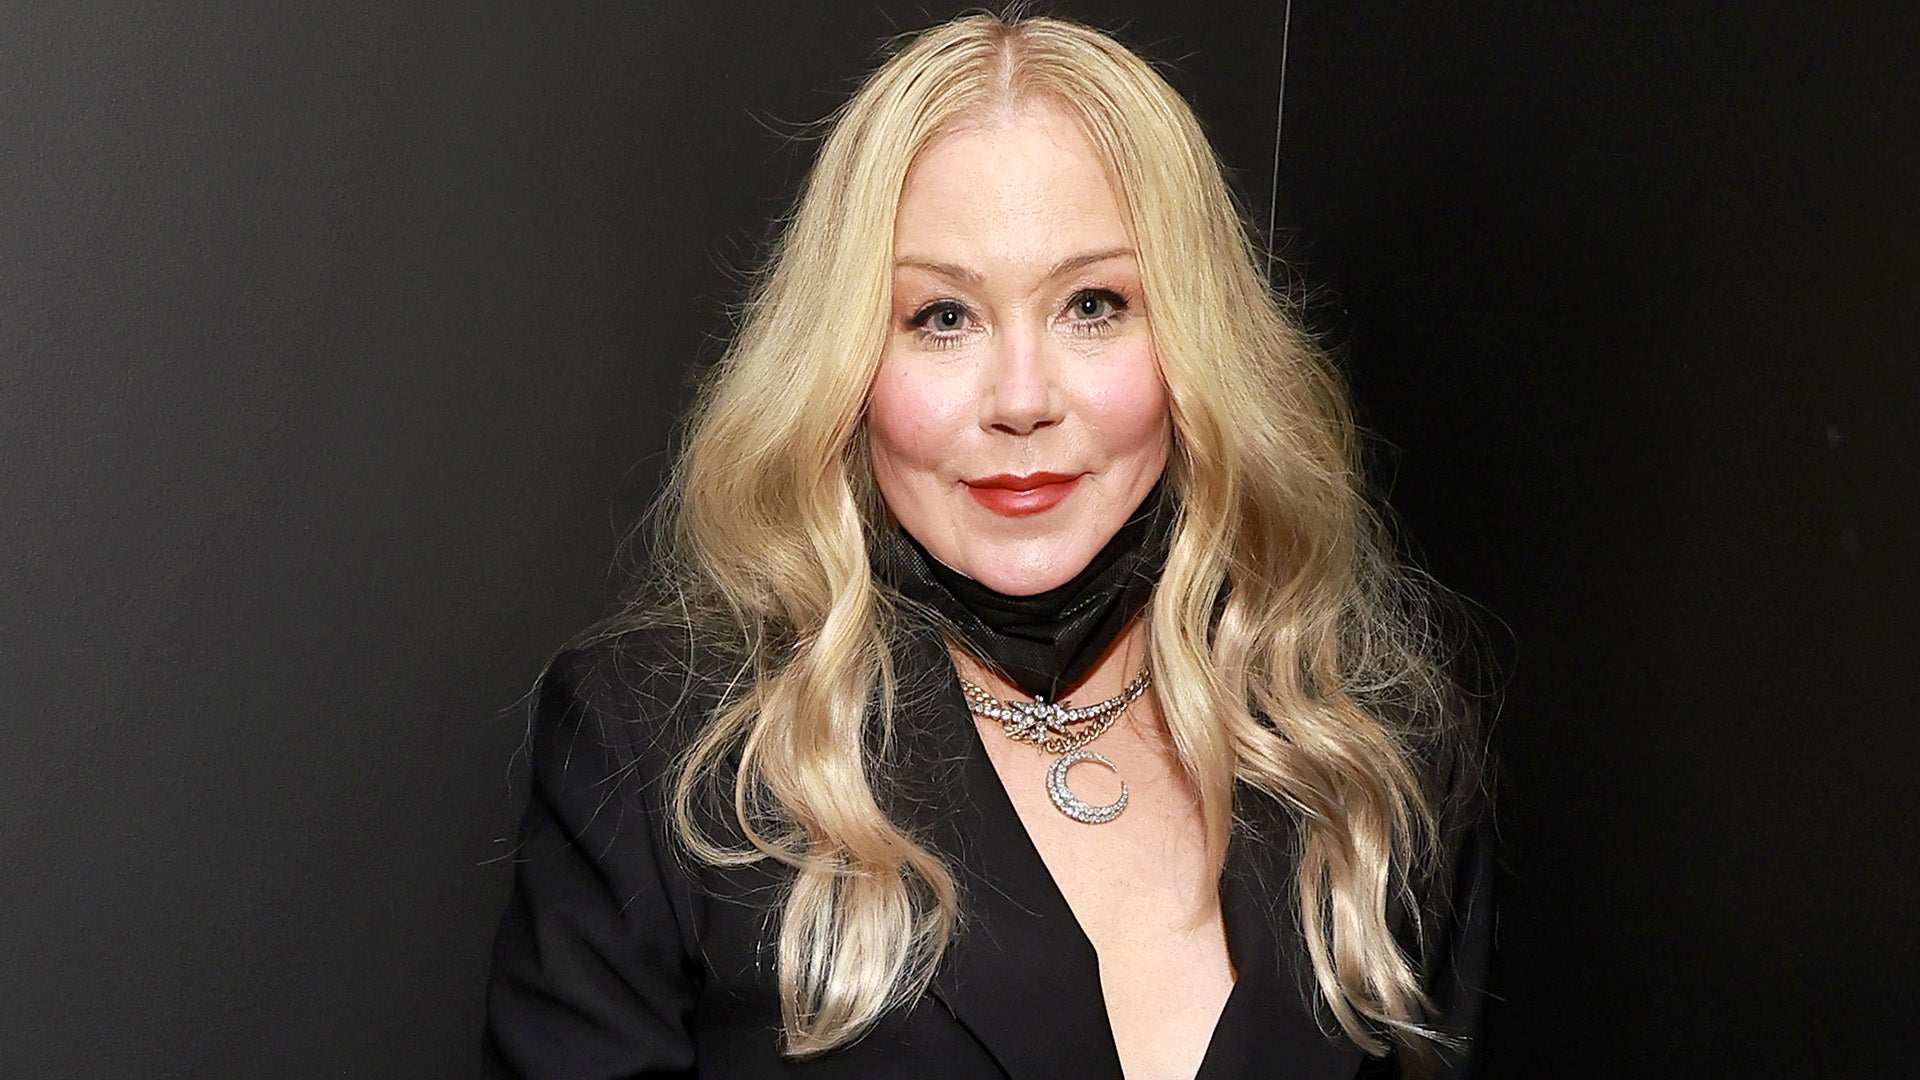 Christina Applegate Hasn't Showered in Weeks Because of MS Flare-Up